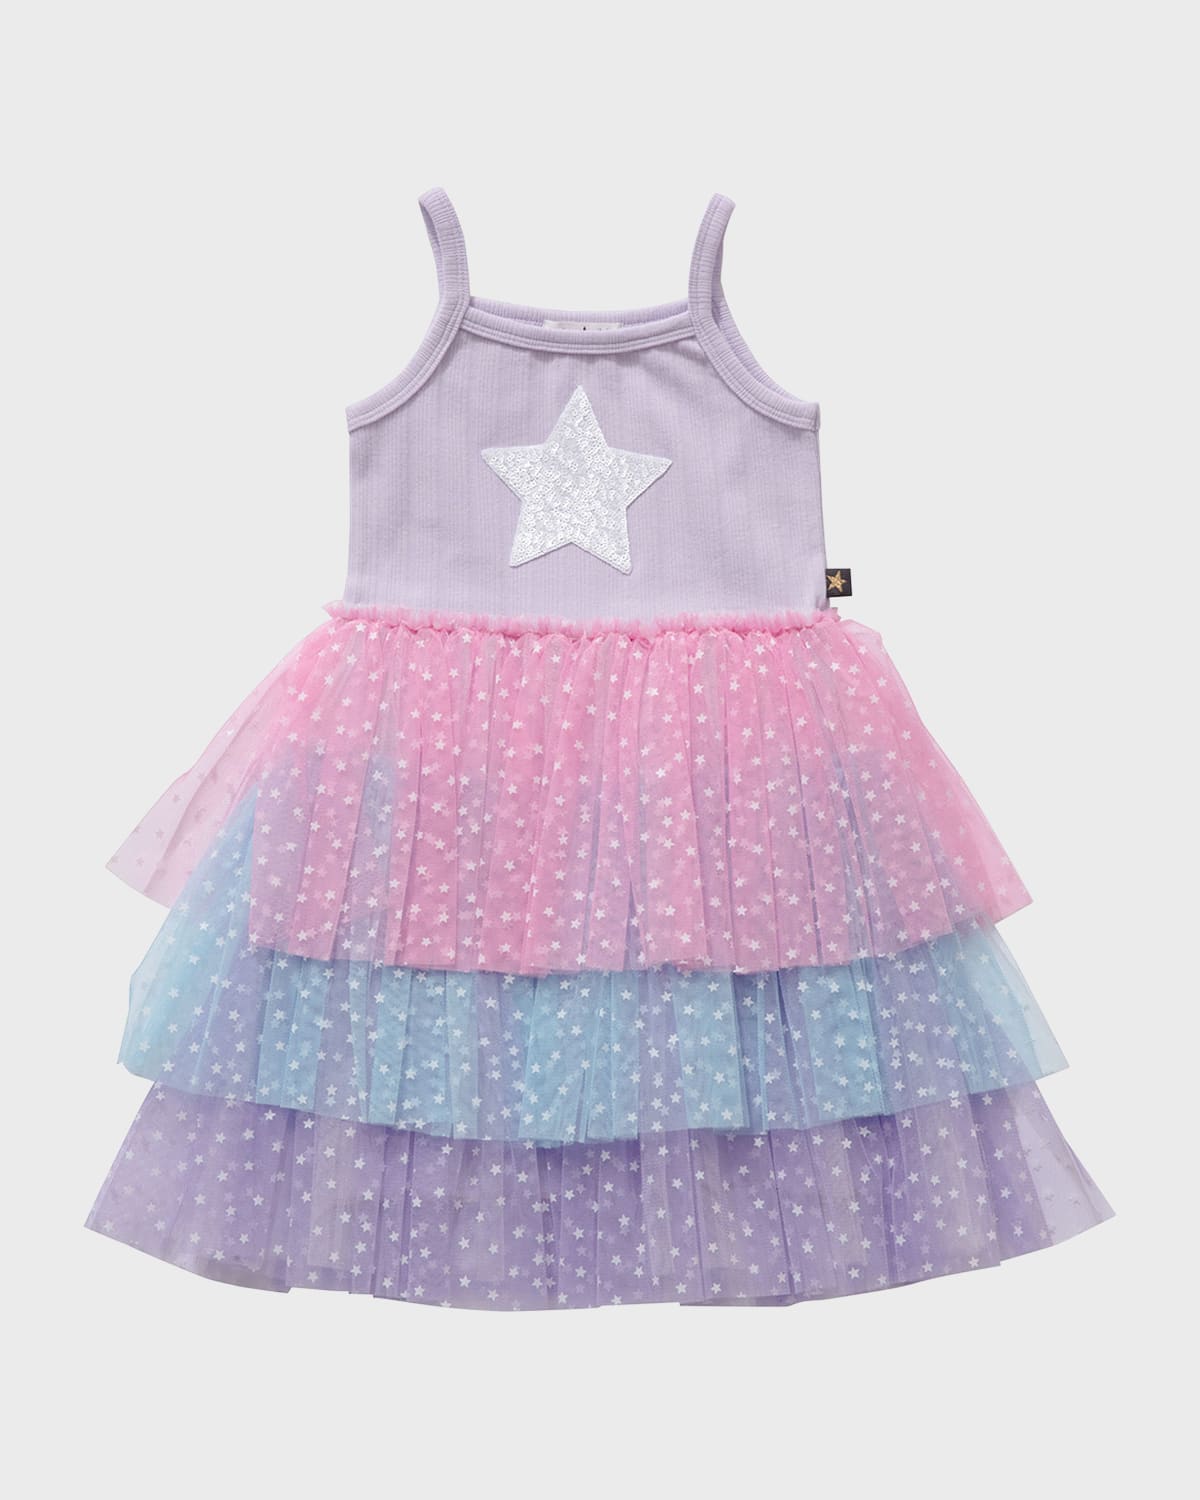 Petite Hailey Kids' Girl's Ballet Bodice Multicolor Tiered Star Tulle Dress In Purple